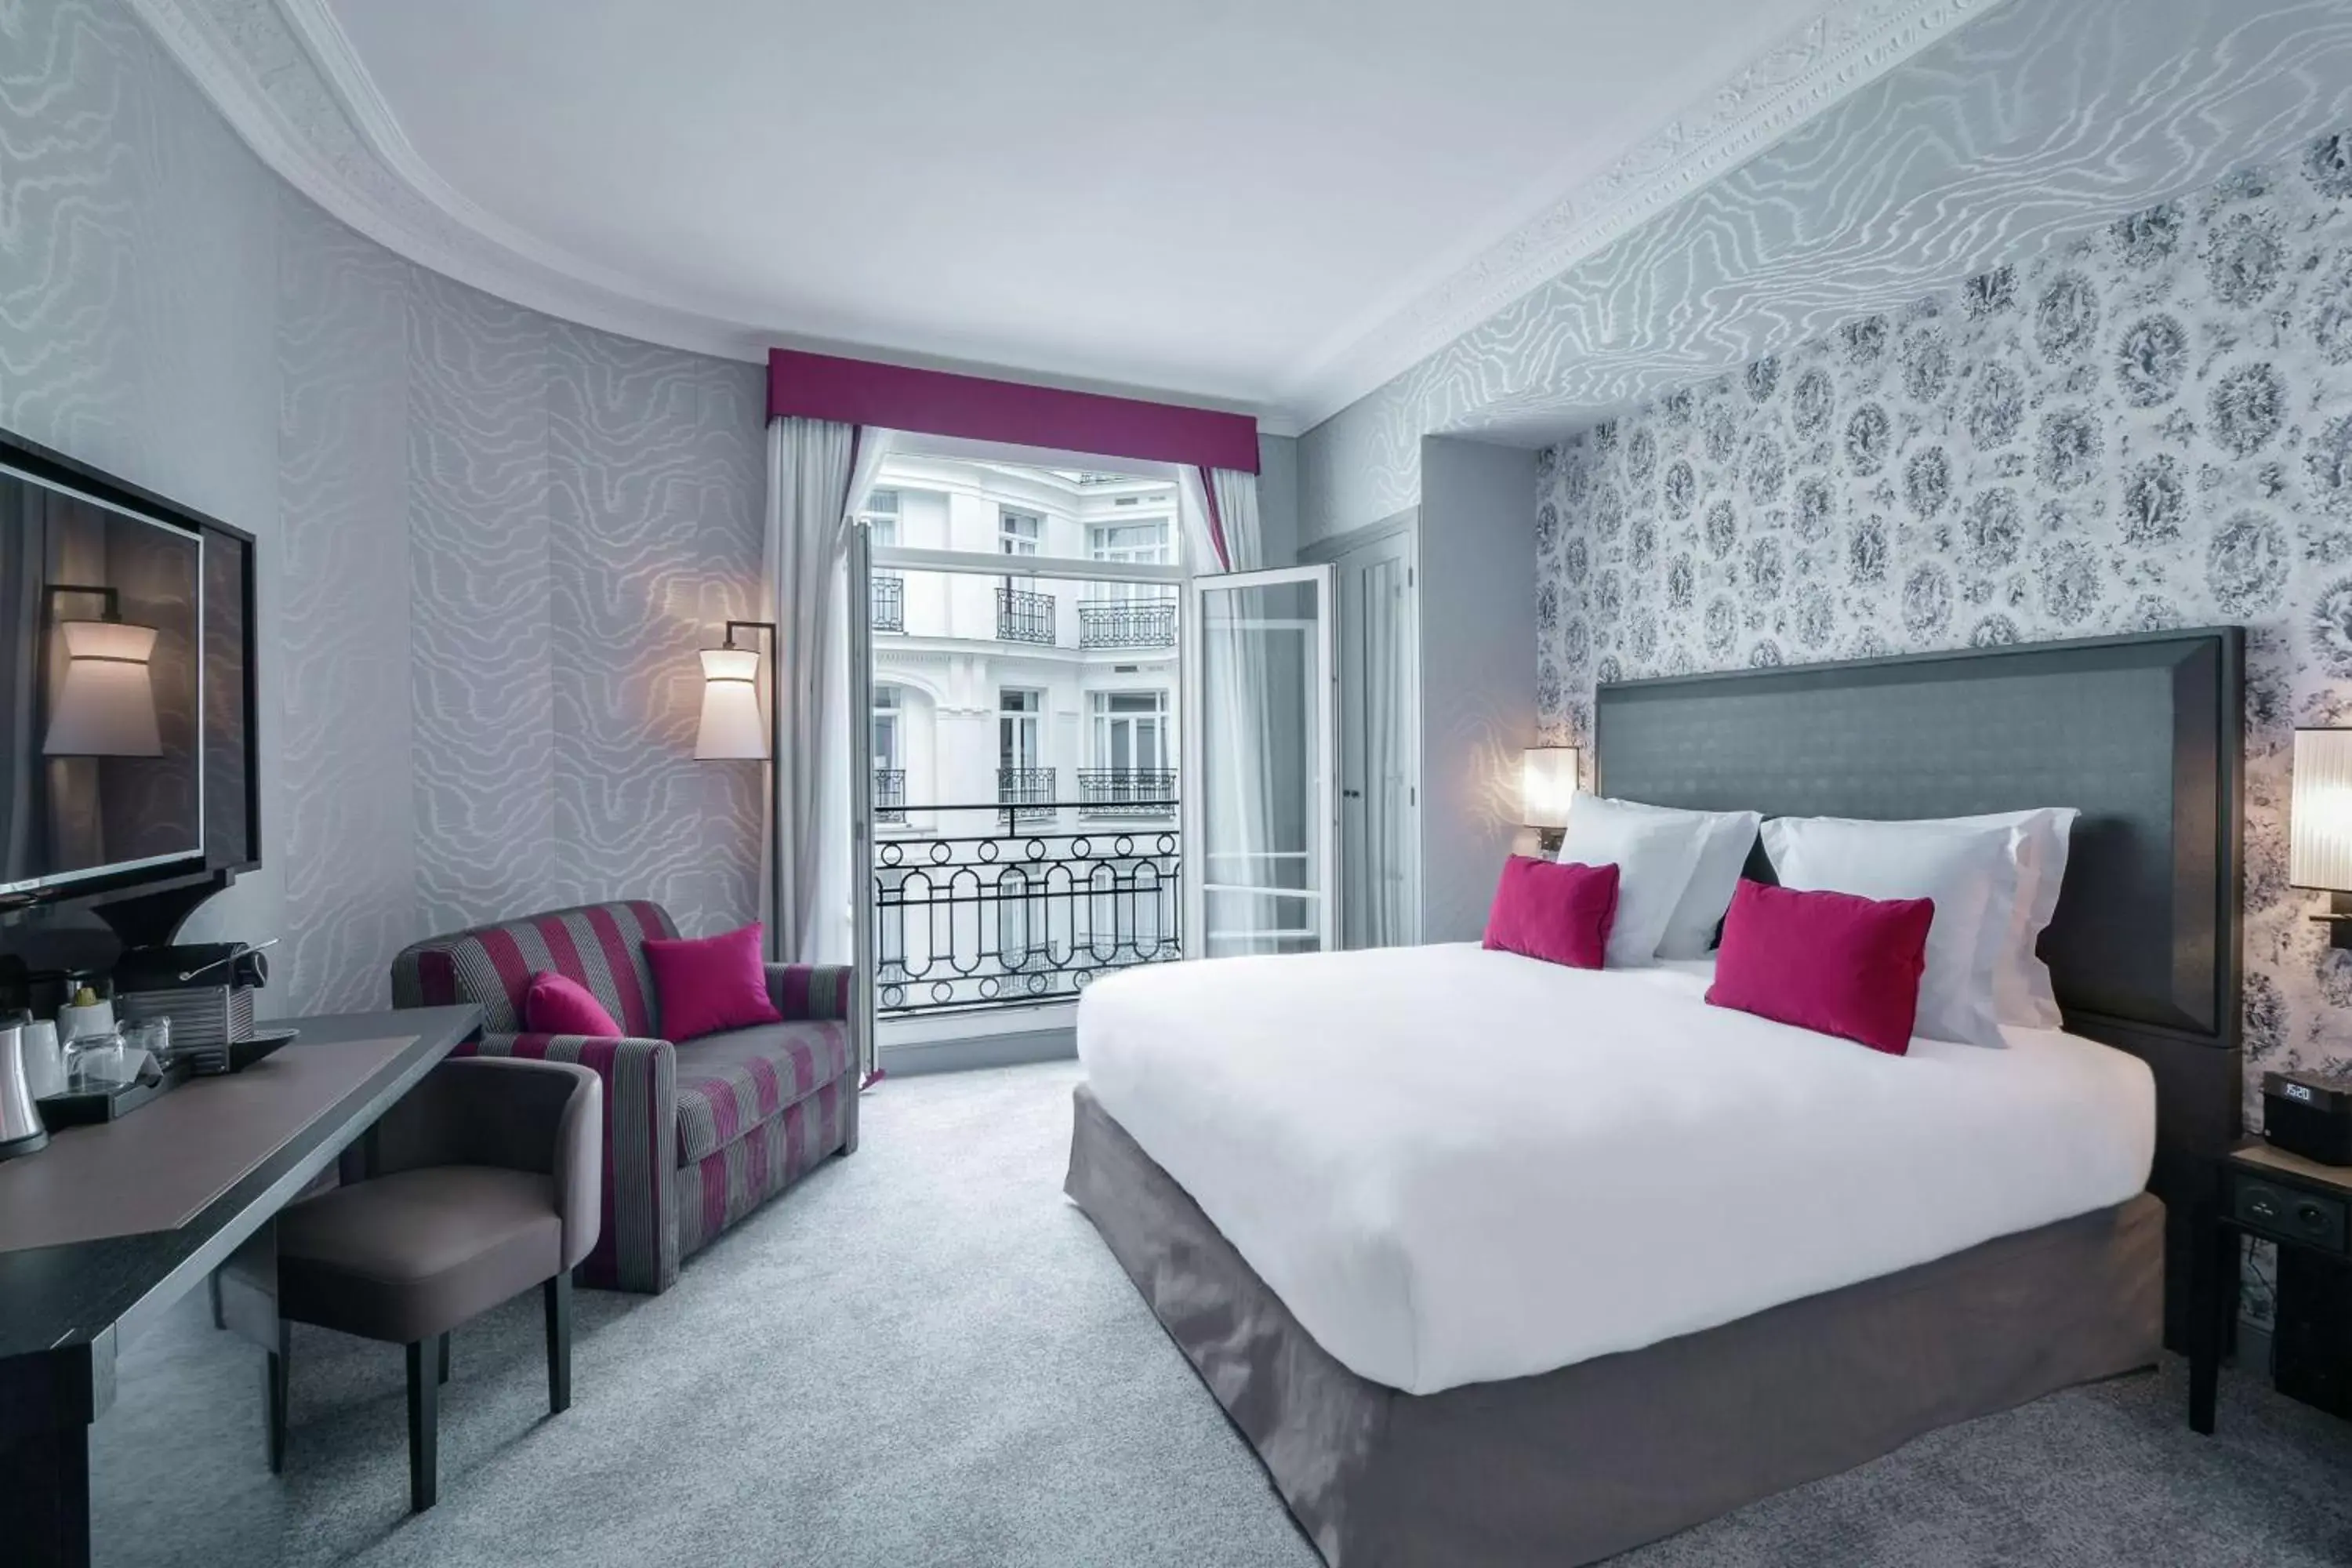 Bedroom in Maison Astor Paris, Curio Collection by Hilton